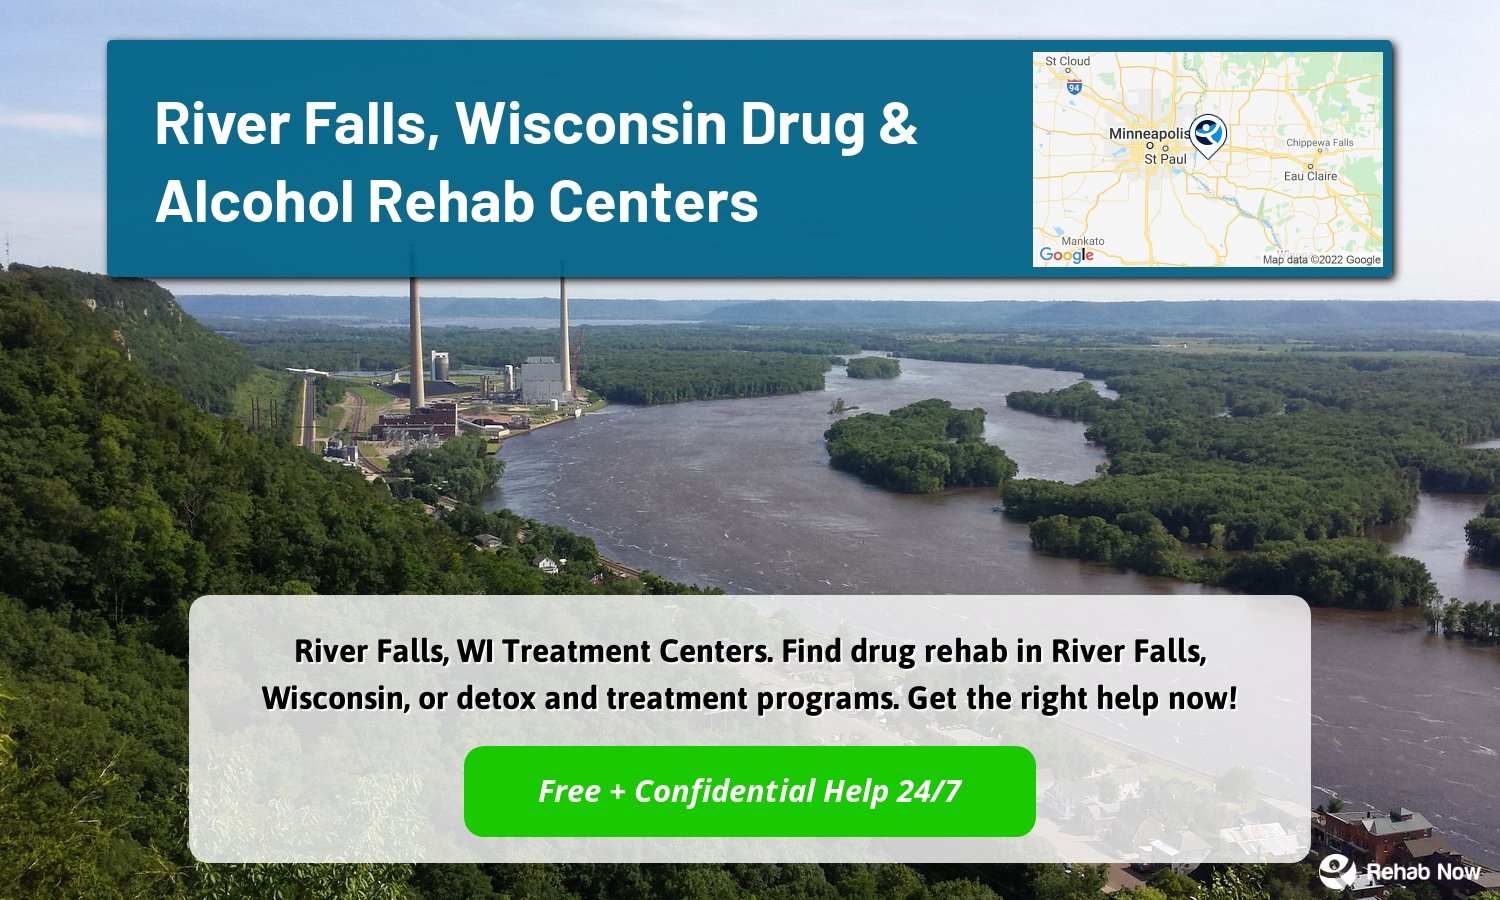 River Falls, WI Treatment Centers. Find drug rehab in River Falls, Wisconsin, or detox and treatment programs. Get the right help now!